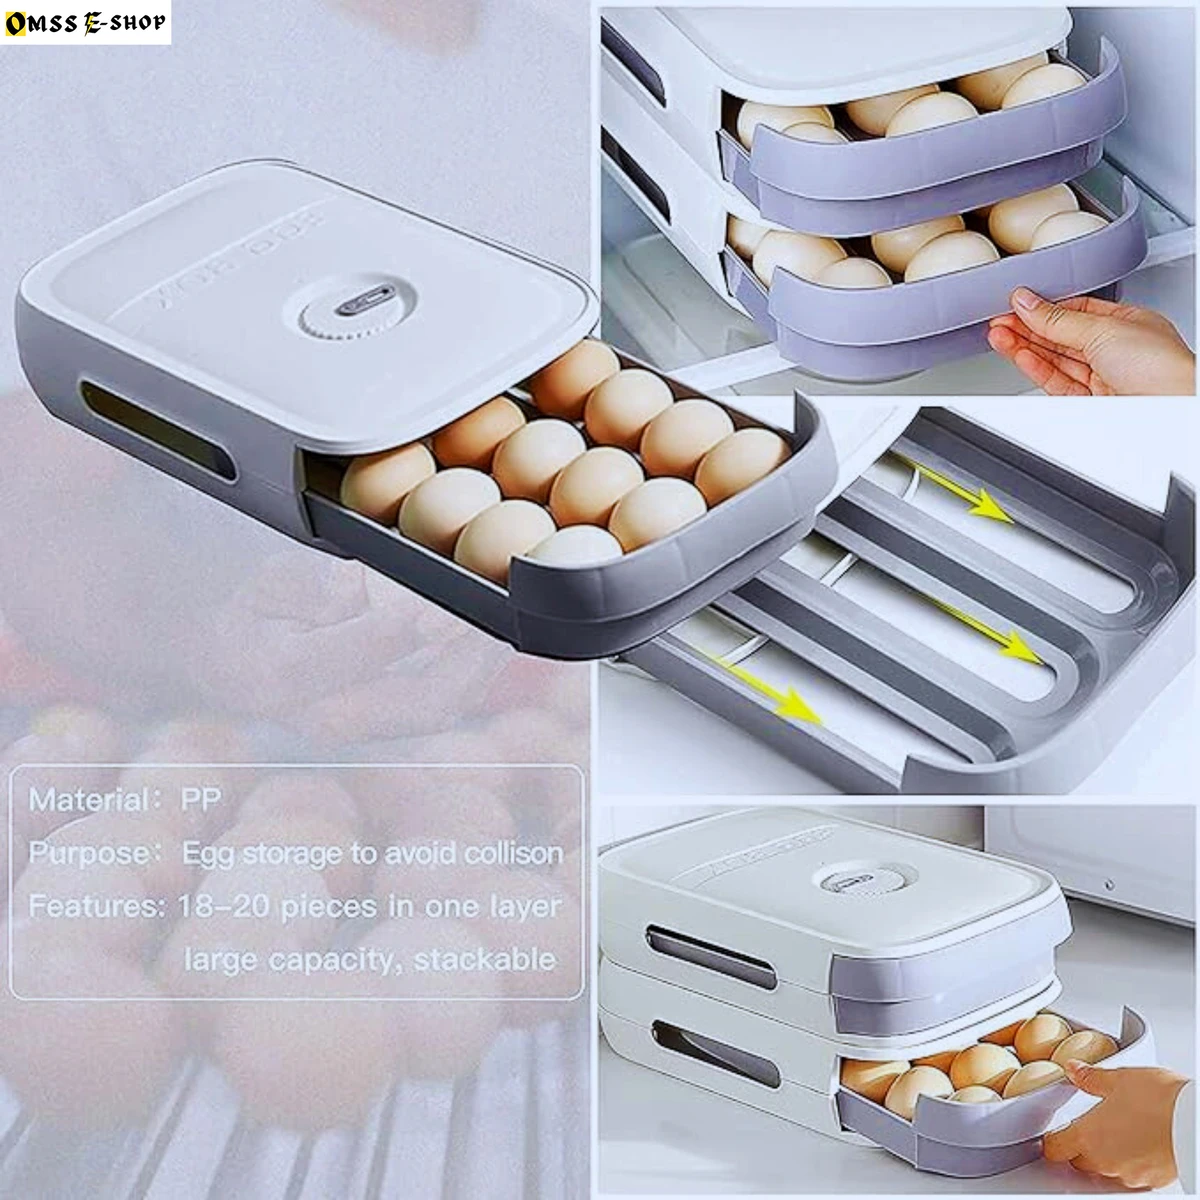 New Stackable Egg Holder Automatic Rolling Drawer Type Storage Box, Refrigerator Egg Tray, Space Saver Container, Egg Tray Container With Date Reminder, Egg Storage Container With Vent Design, Suitable For Kitchen Storage Tools